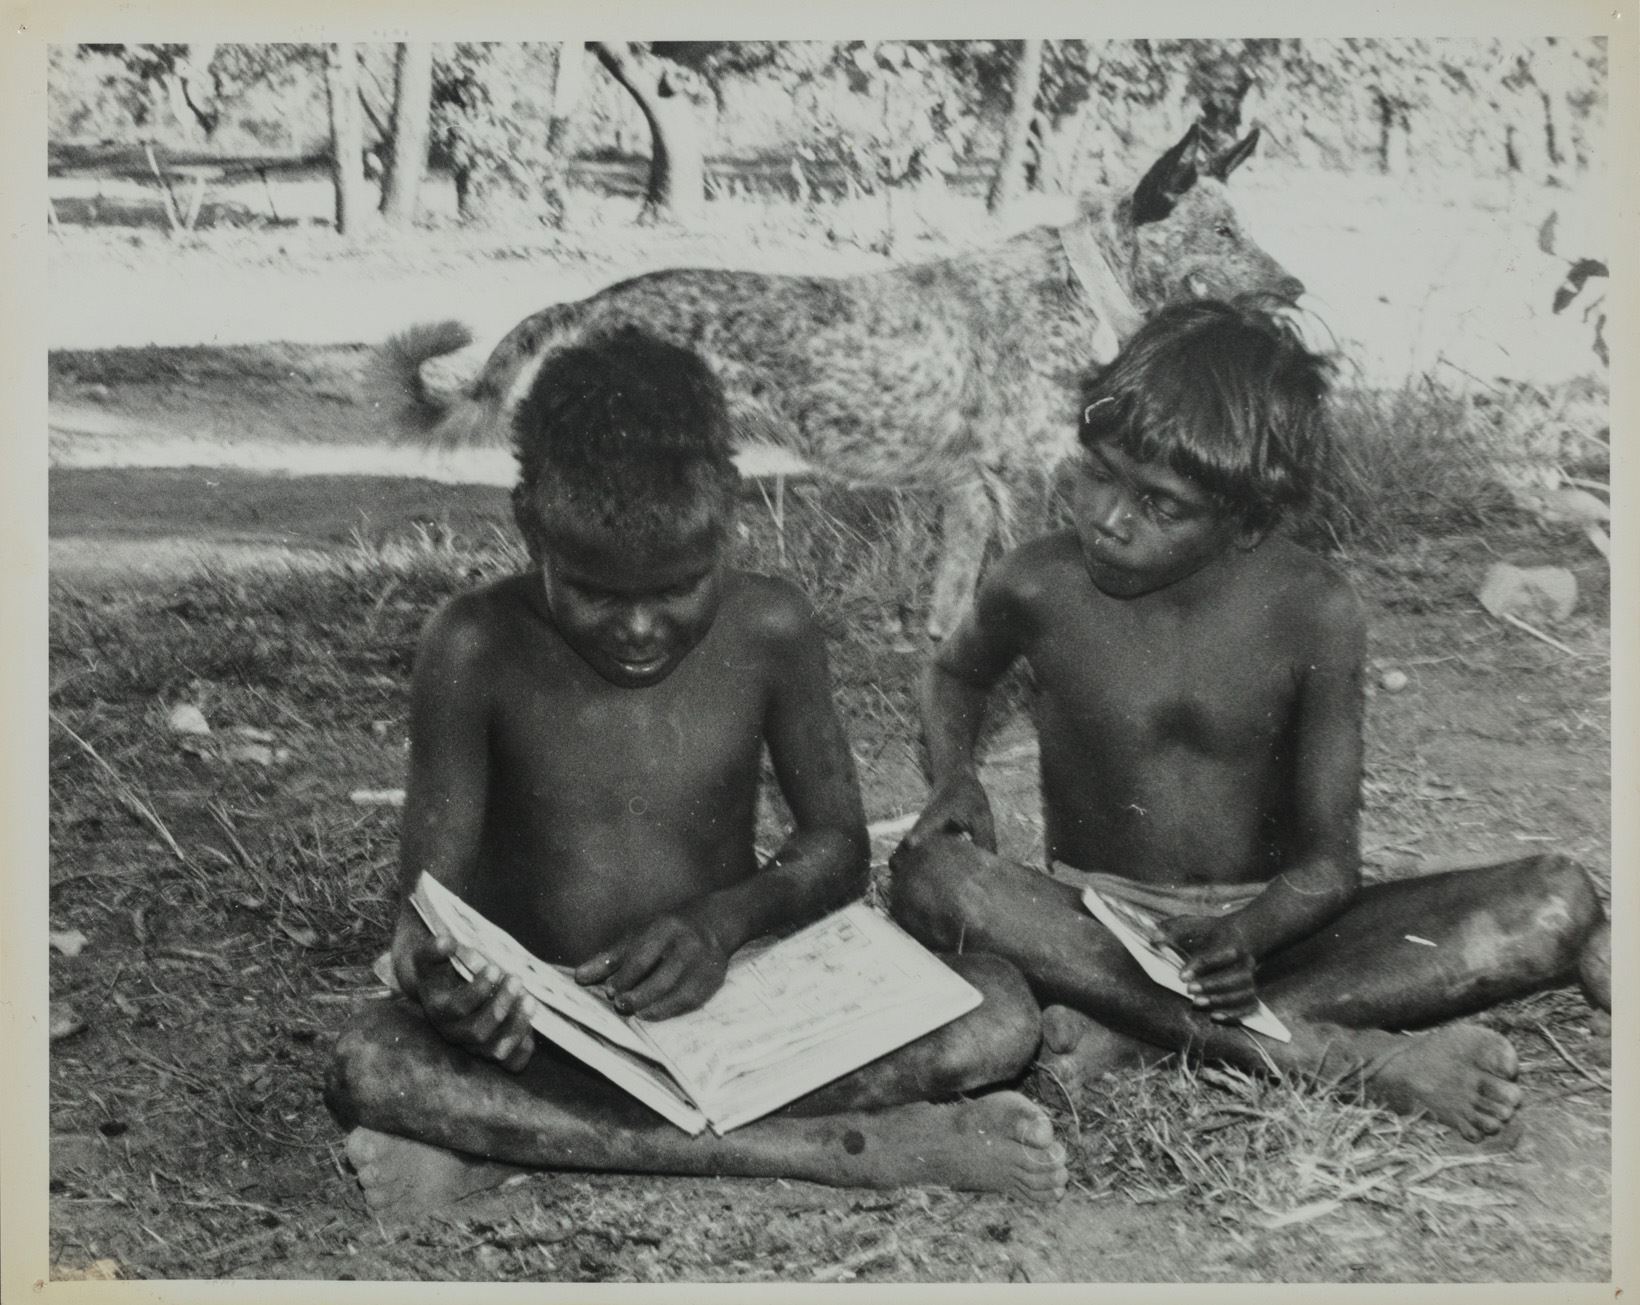 Two young boys with no shirts on sitting crossed legged on the ground reading books